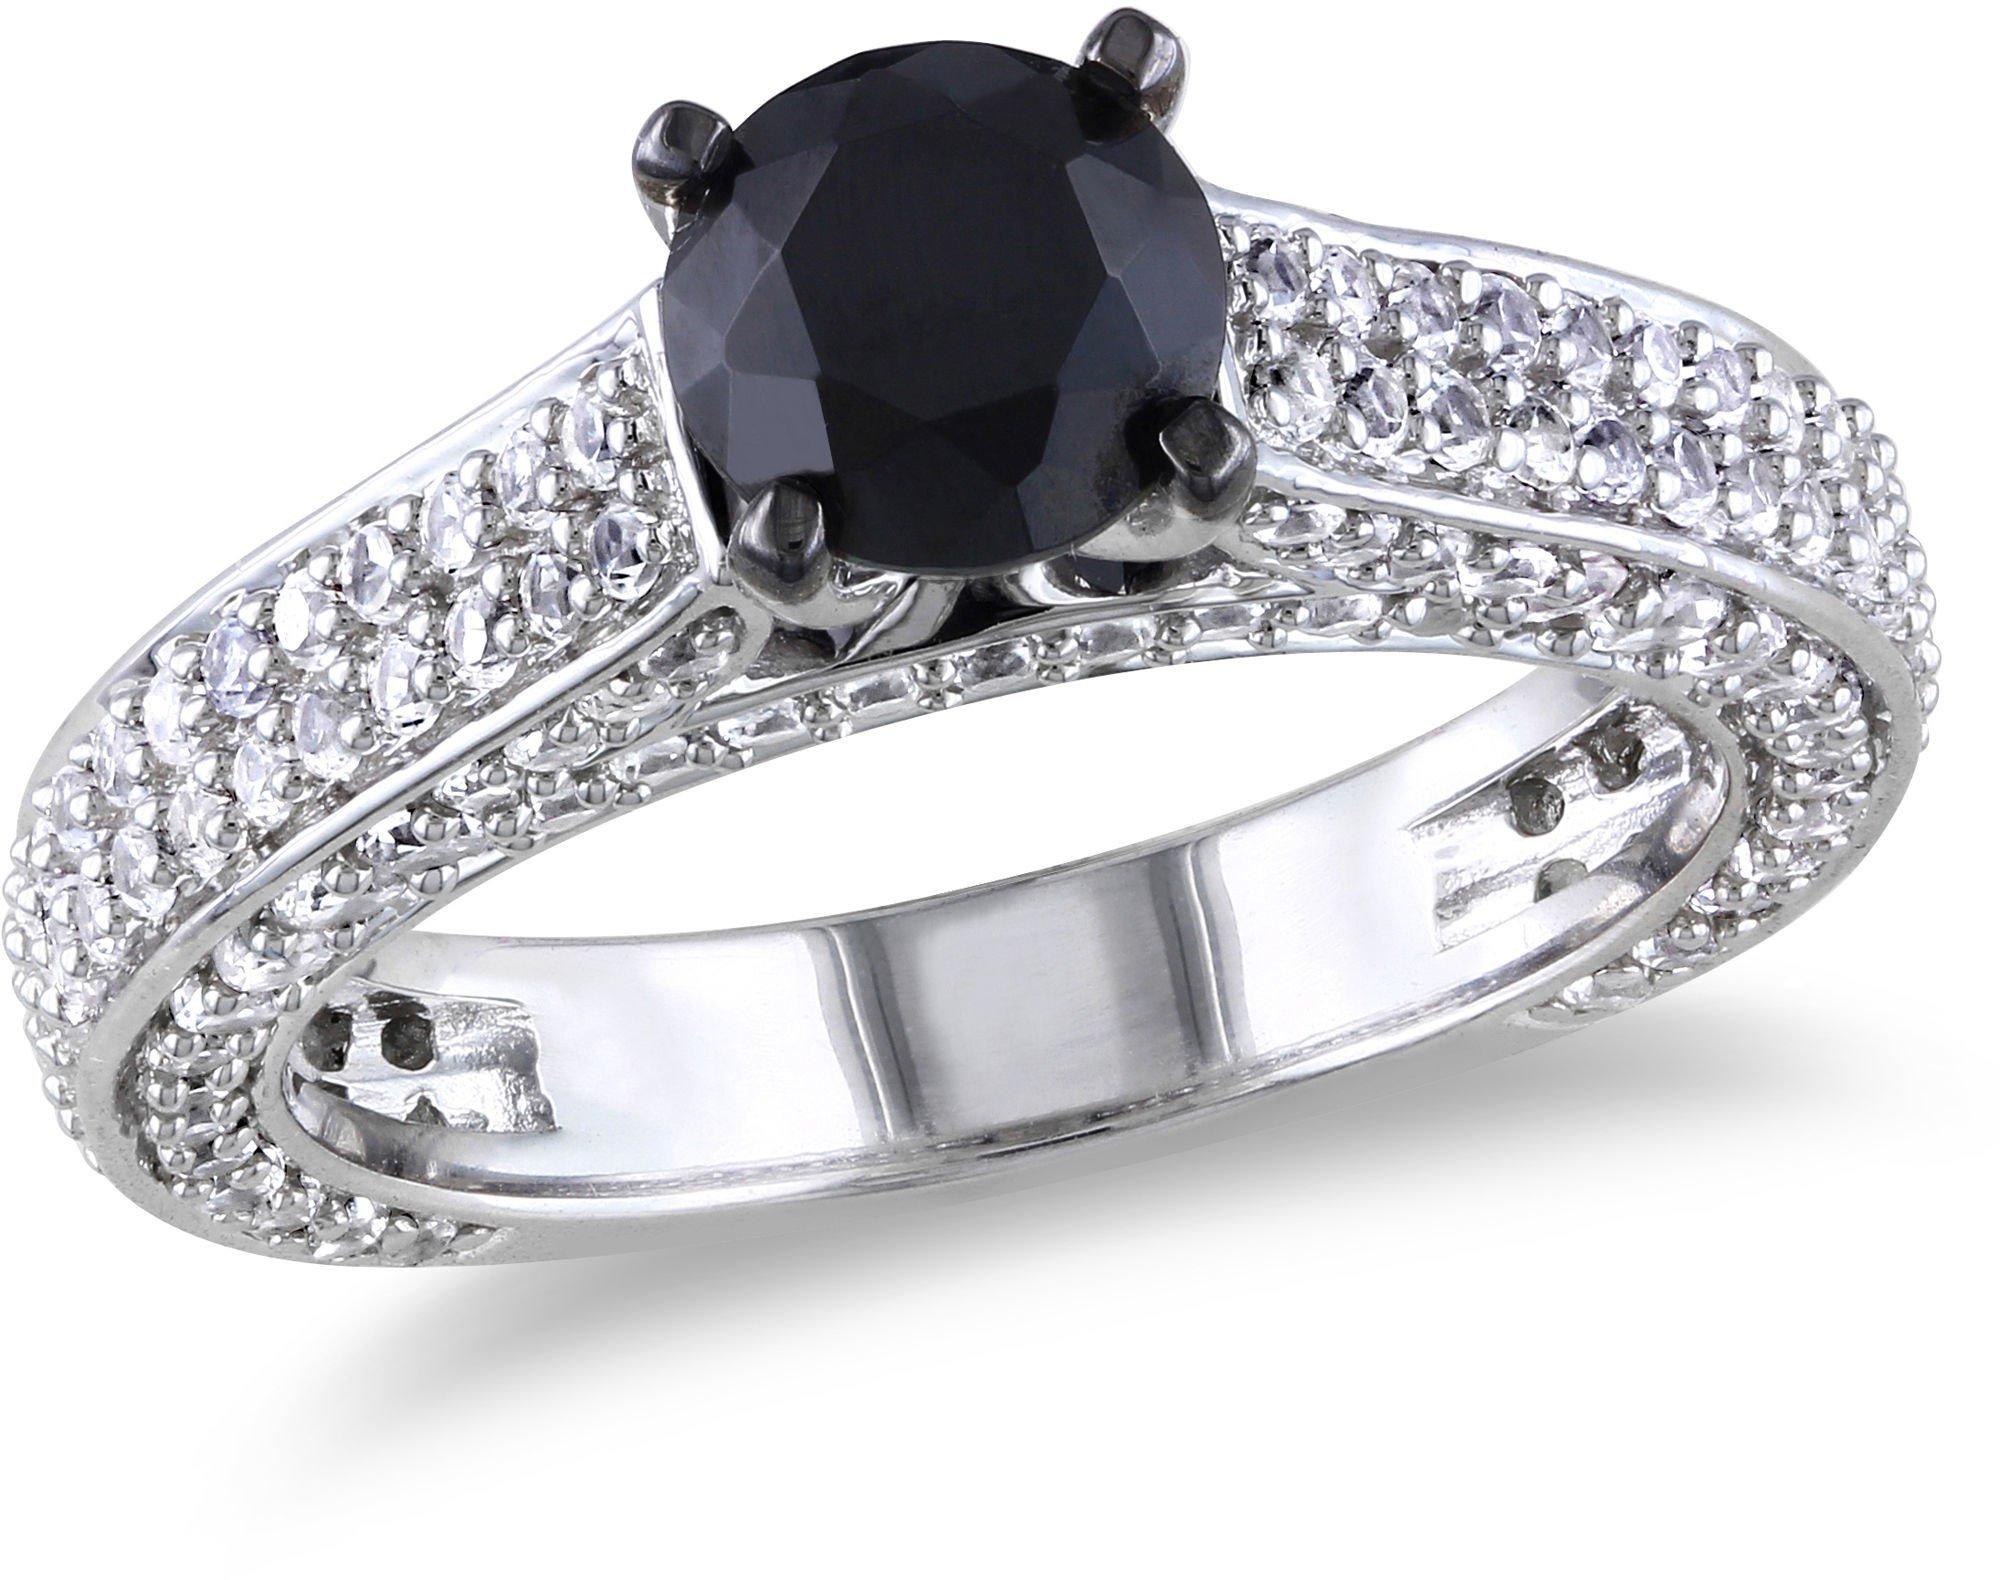 3-ct. T.G.W. Black Spinel Ring